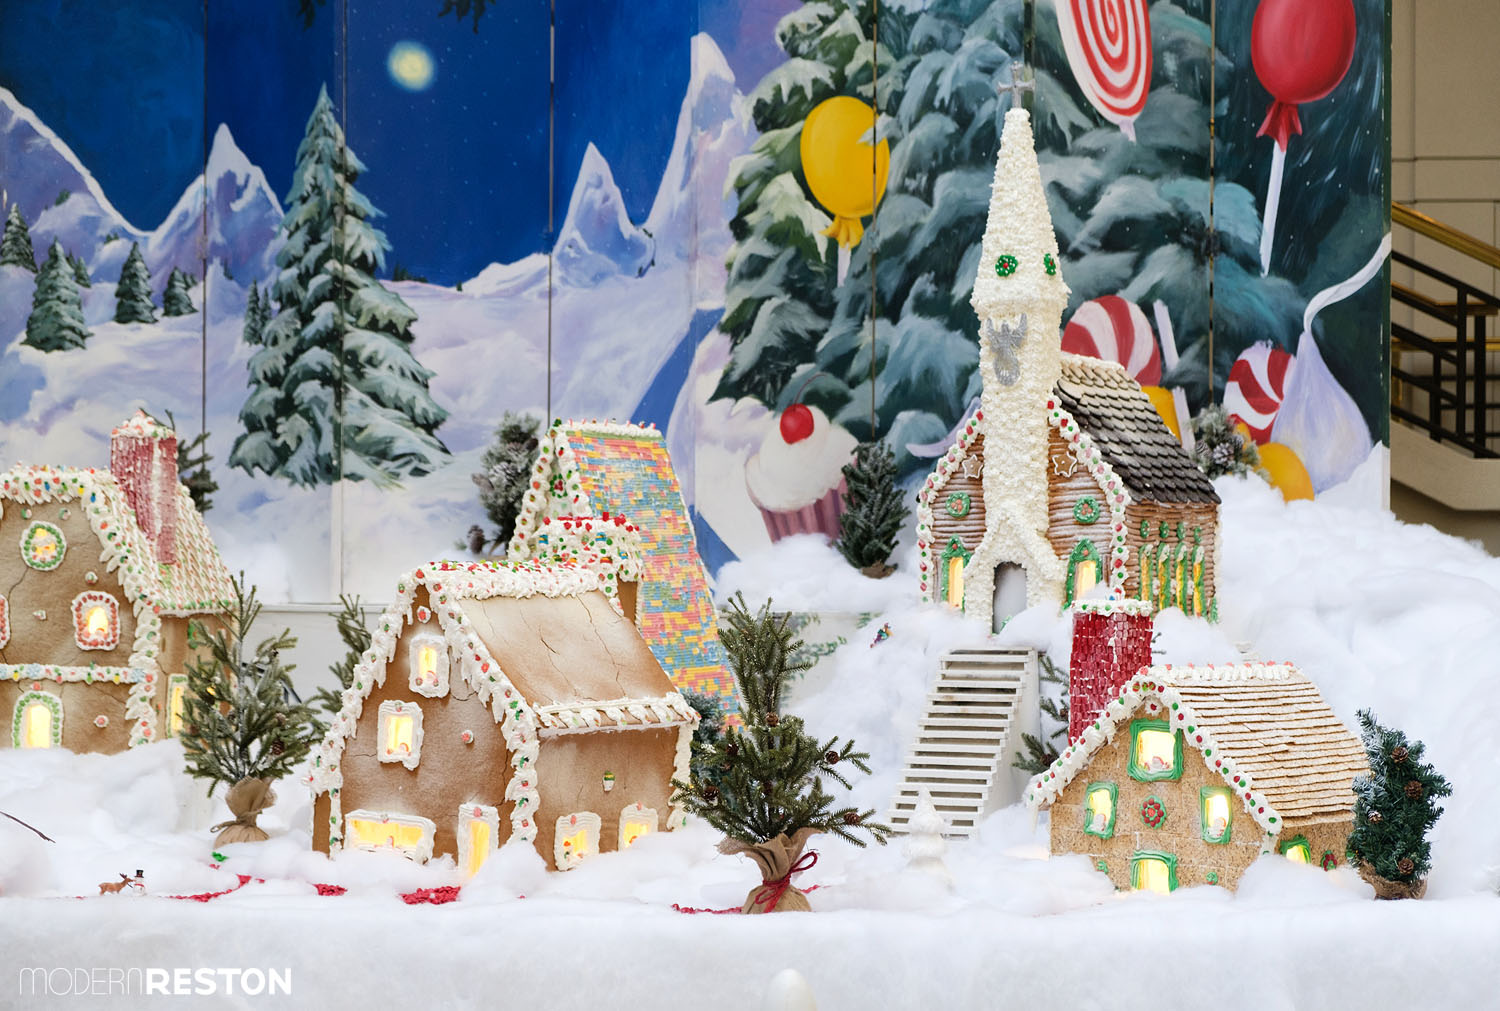 The Reston Holiday Gingerbread Village and How It Gives Back to the ...